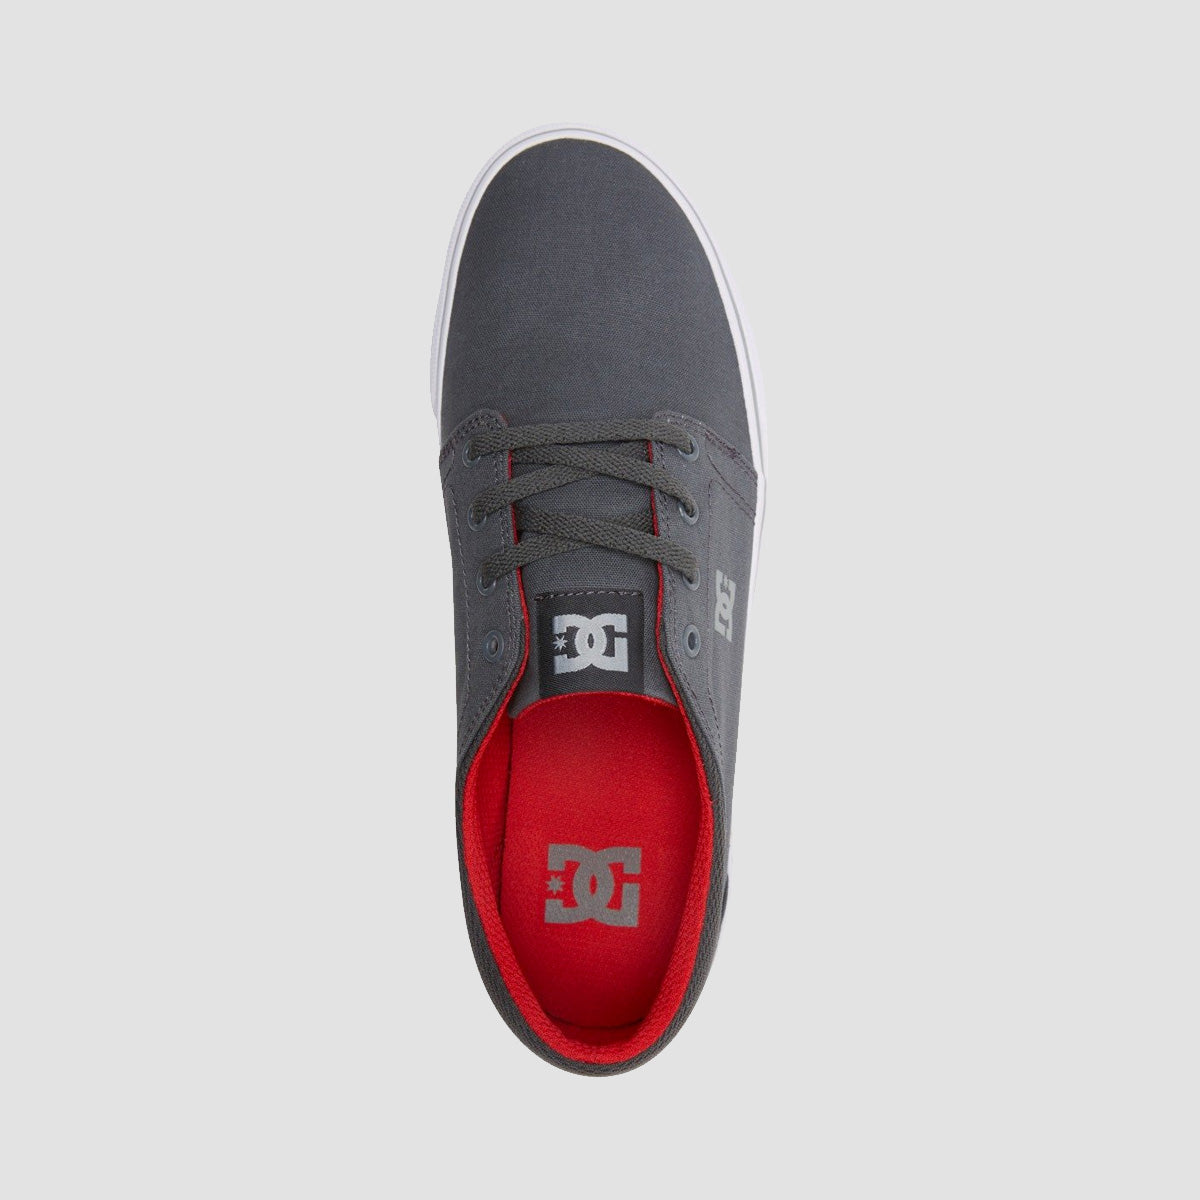 DC Trase TX Shoes - Grey/Grey/Red